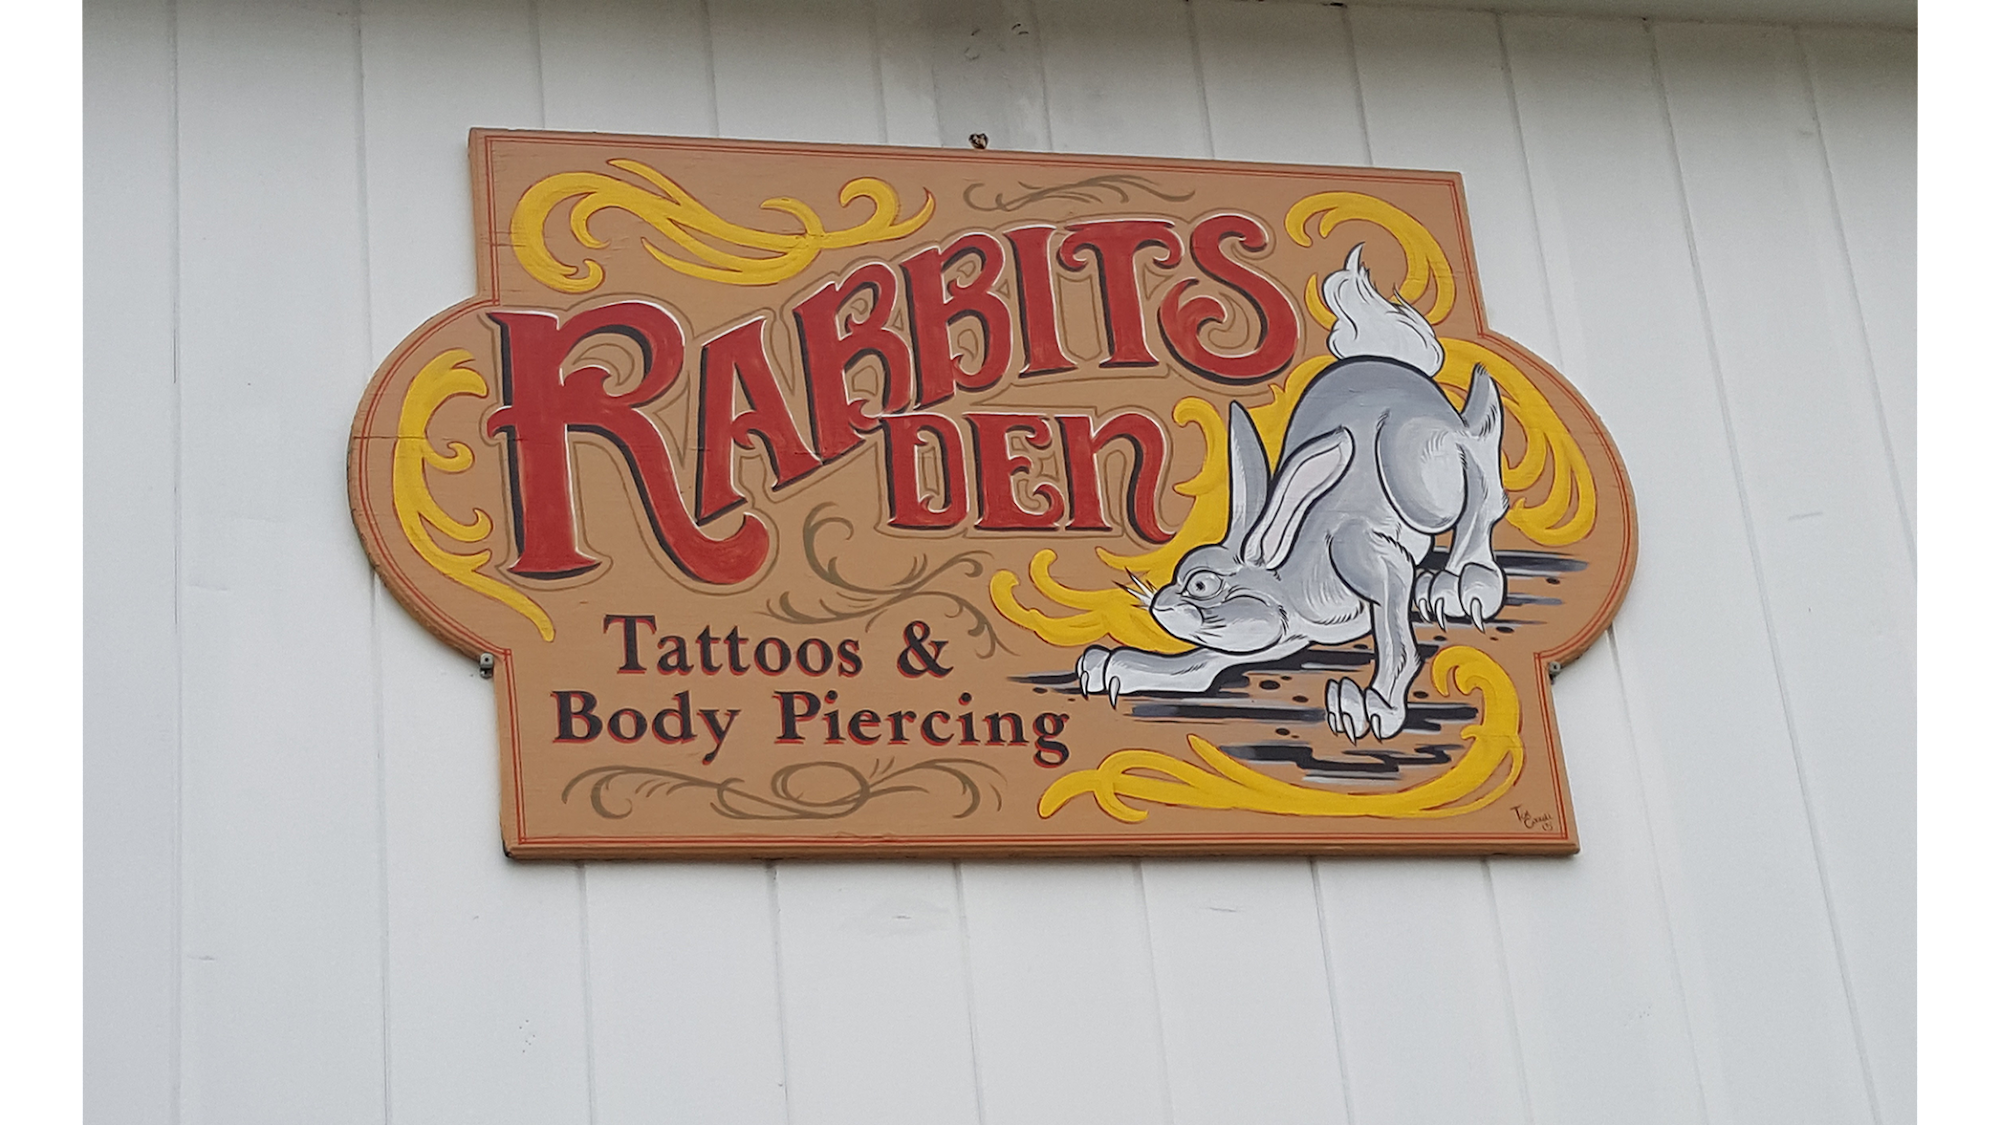 Rabbits Den Tattoo and Piercing Parlor